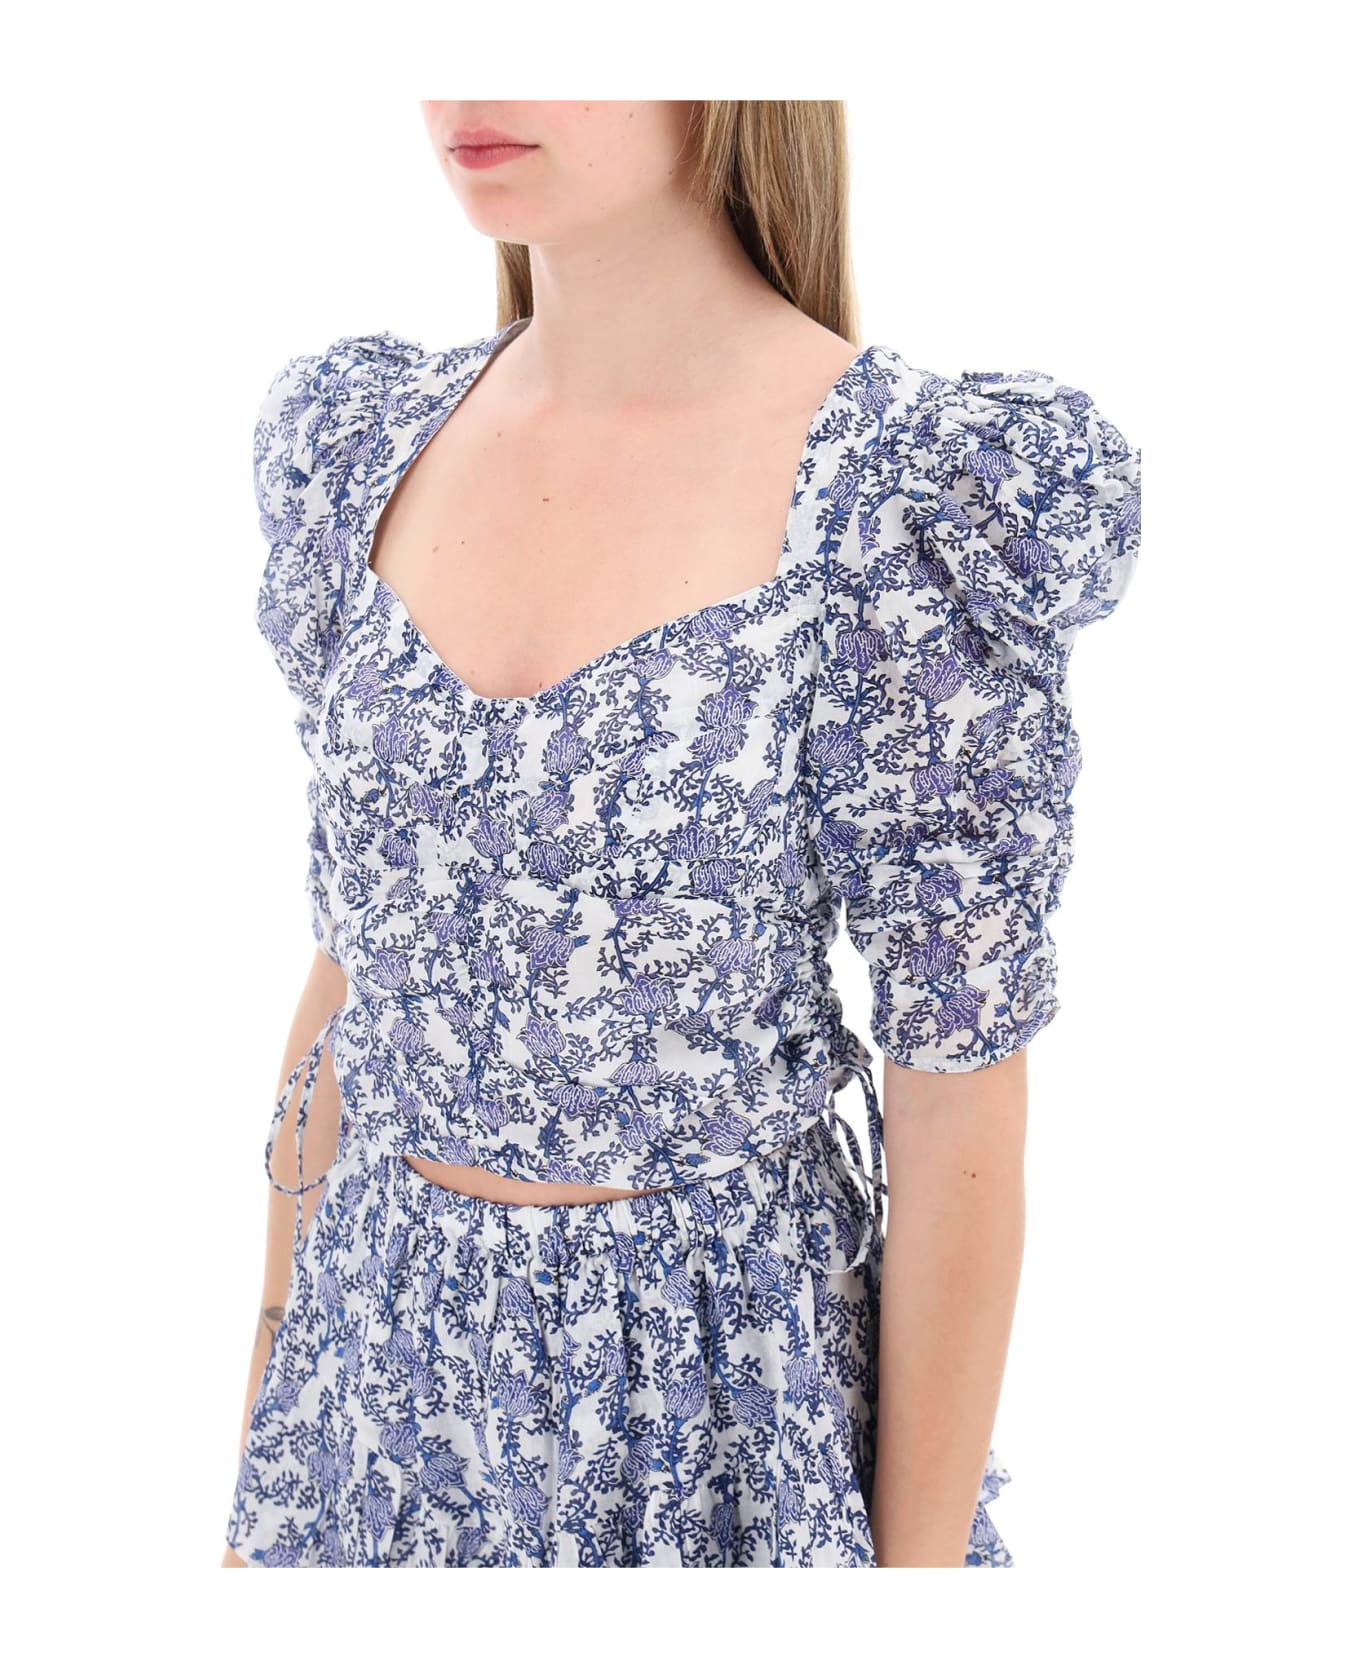 Marant Étoile 'galaor' Cropped Top With Floral Motif - ROYAL BLUE (White)